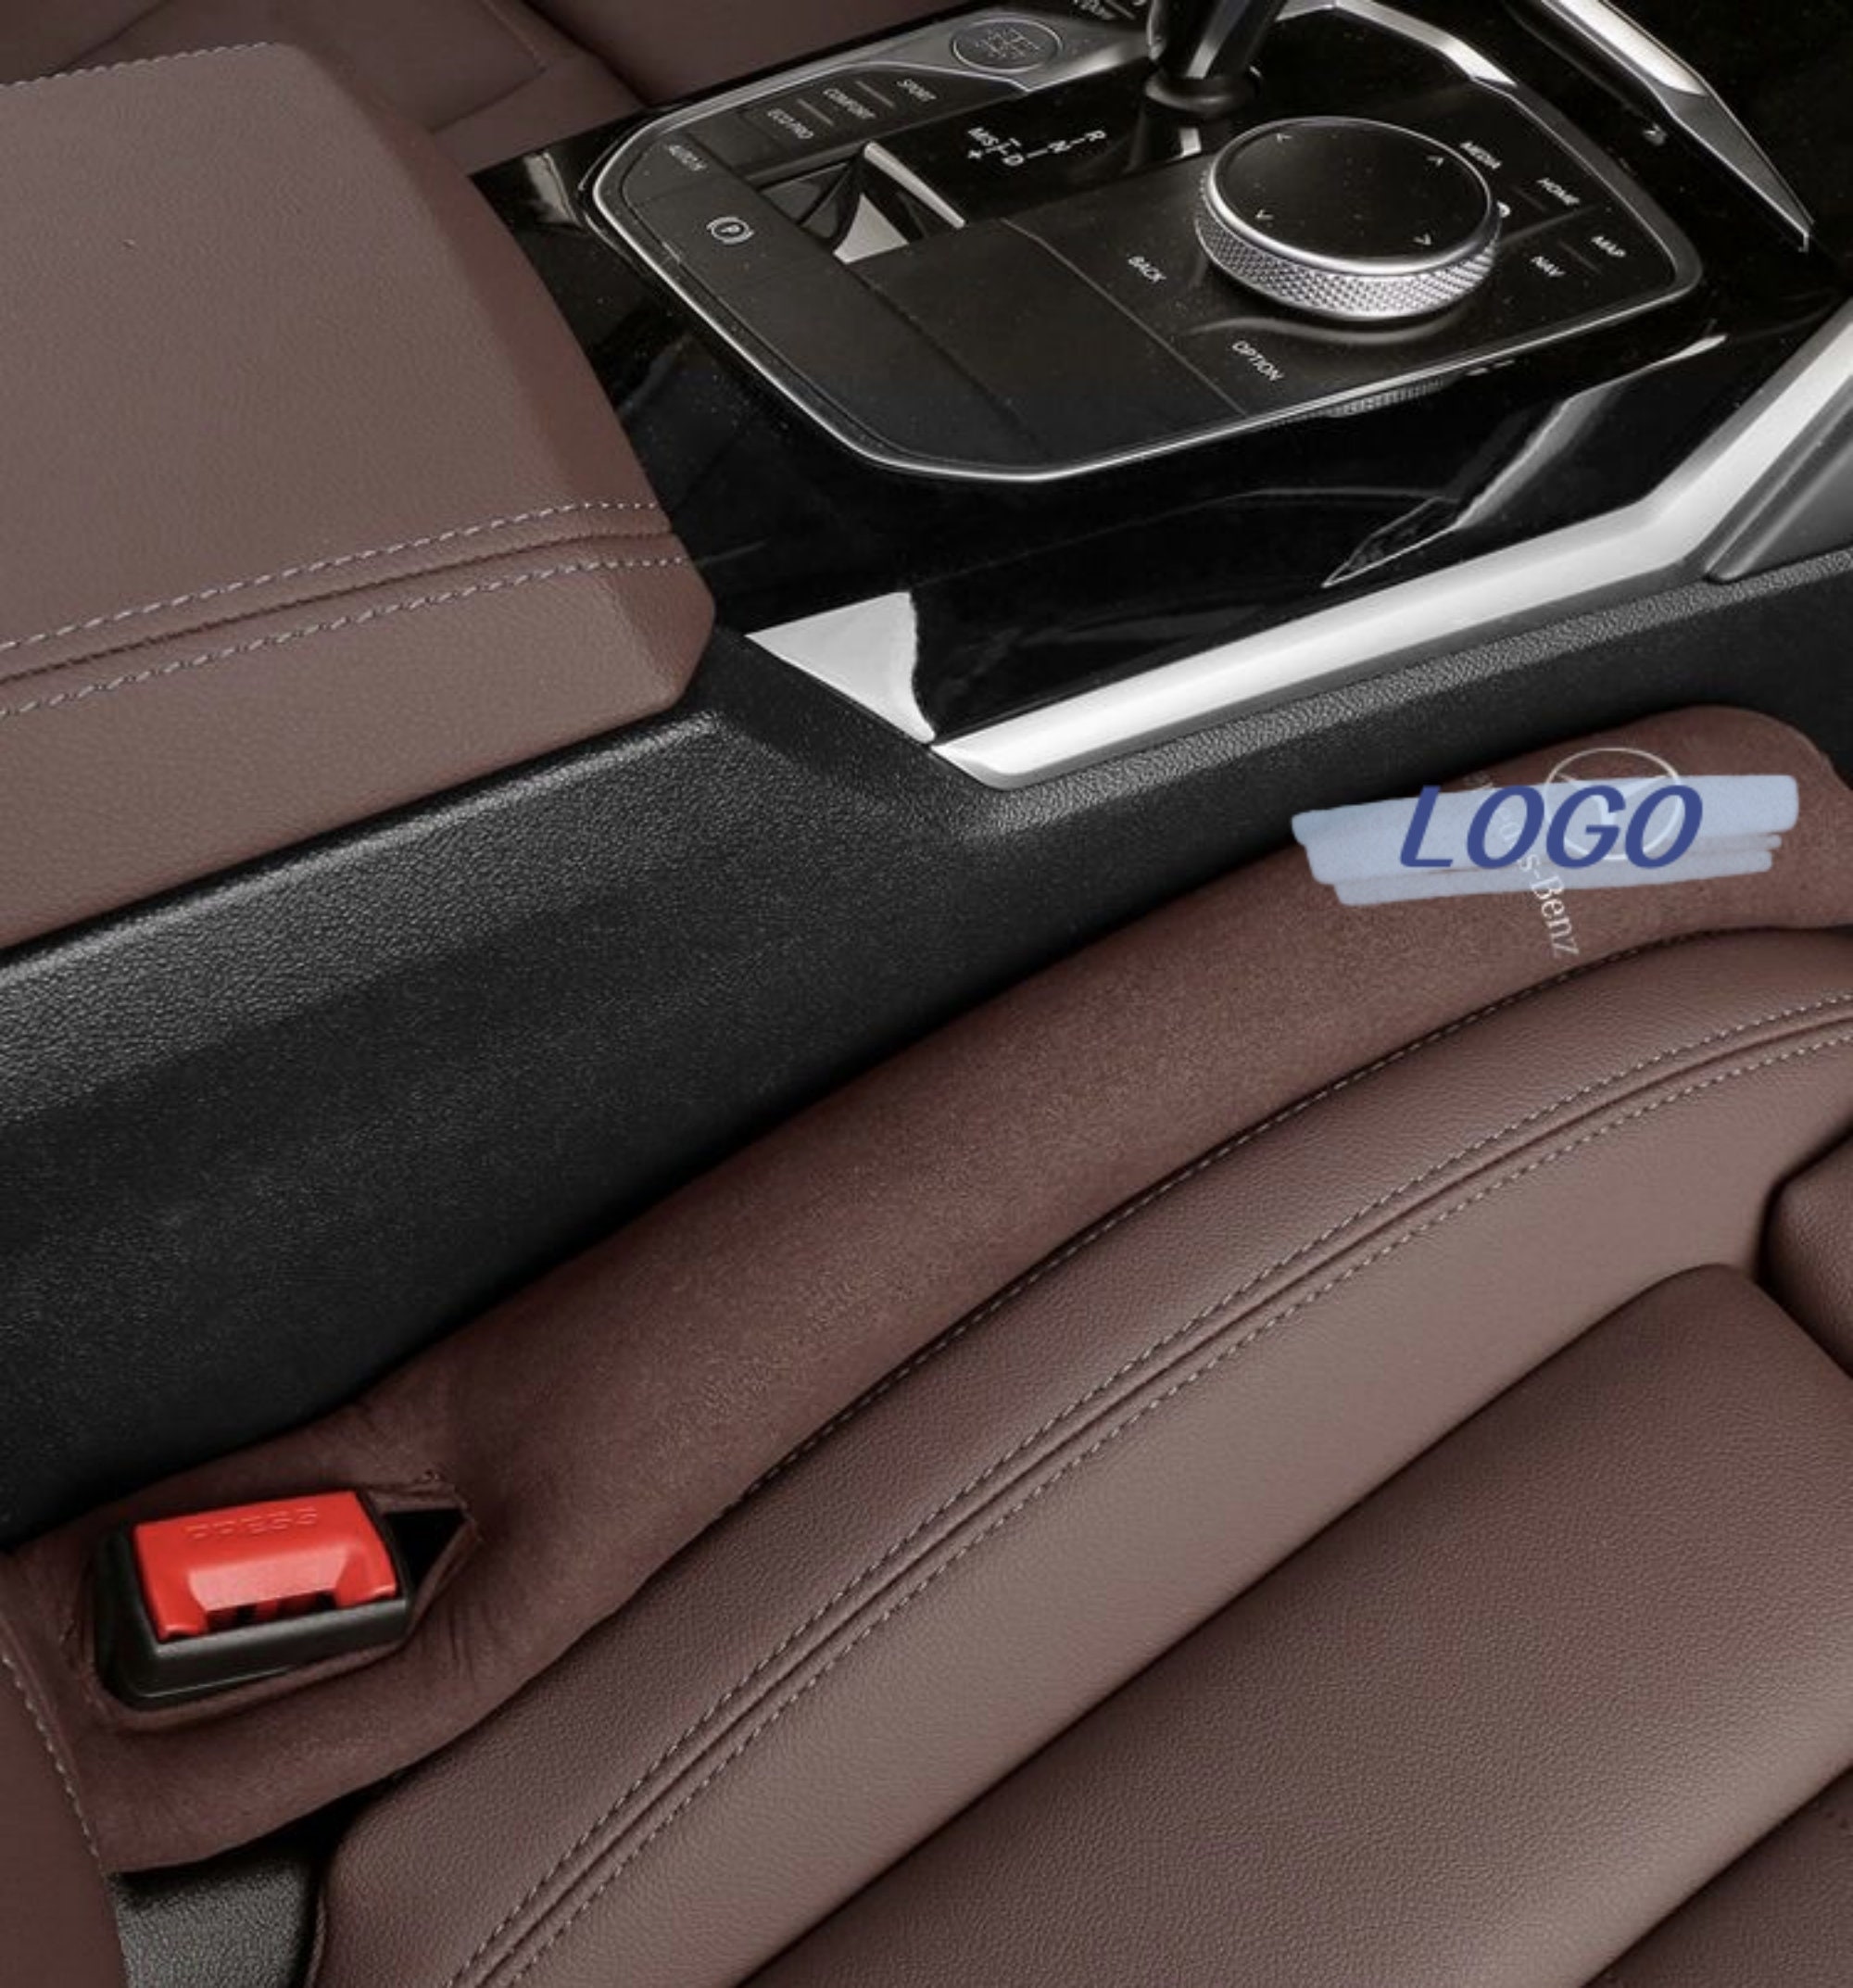 TOKOSIO Car Seat Gap Filler,The Gap Between Seat and Console Crevice Crack  Plug Drop Blocker,PU Leather Keep Things from Falling Console Seat Gap